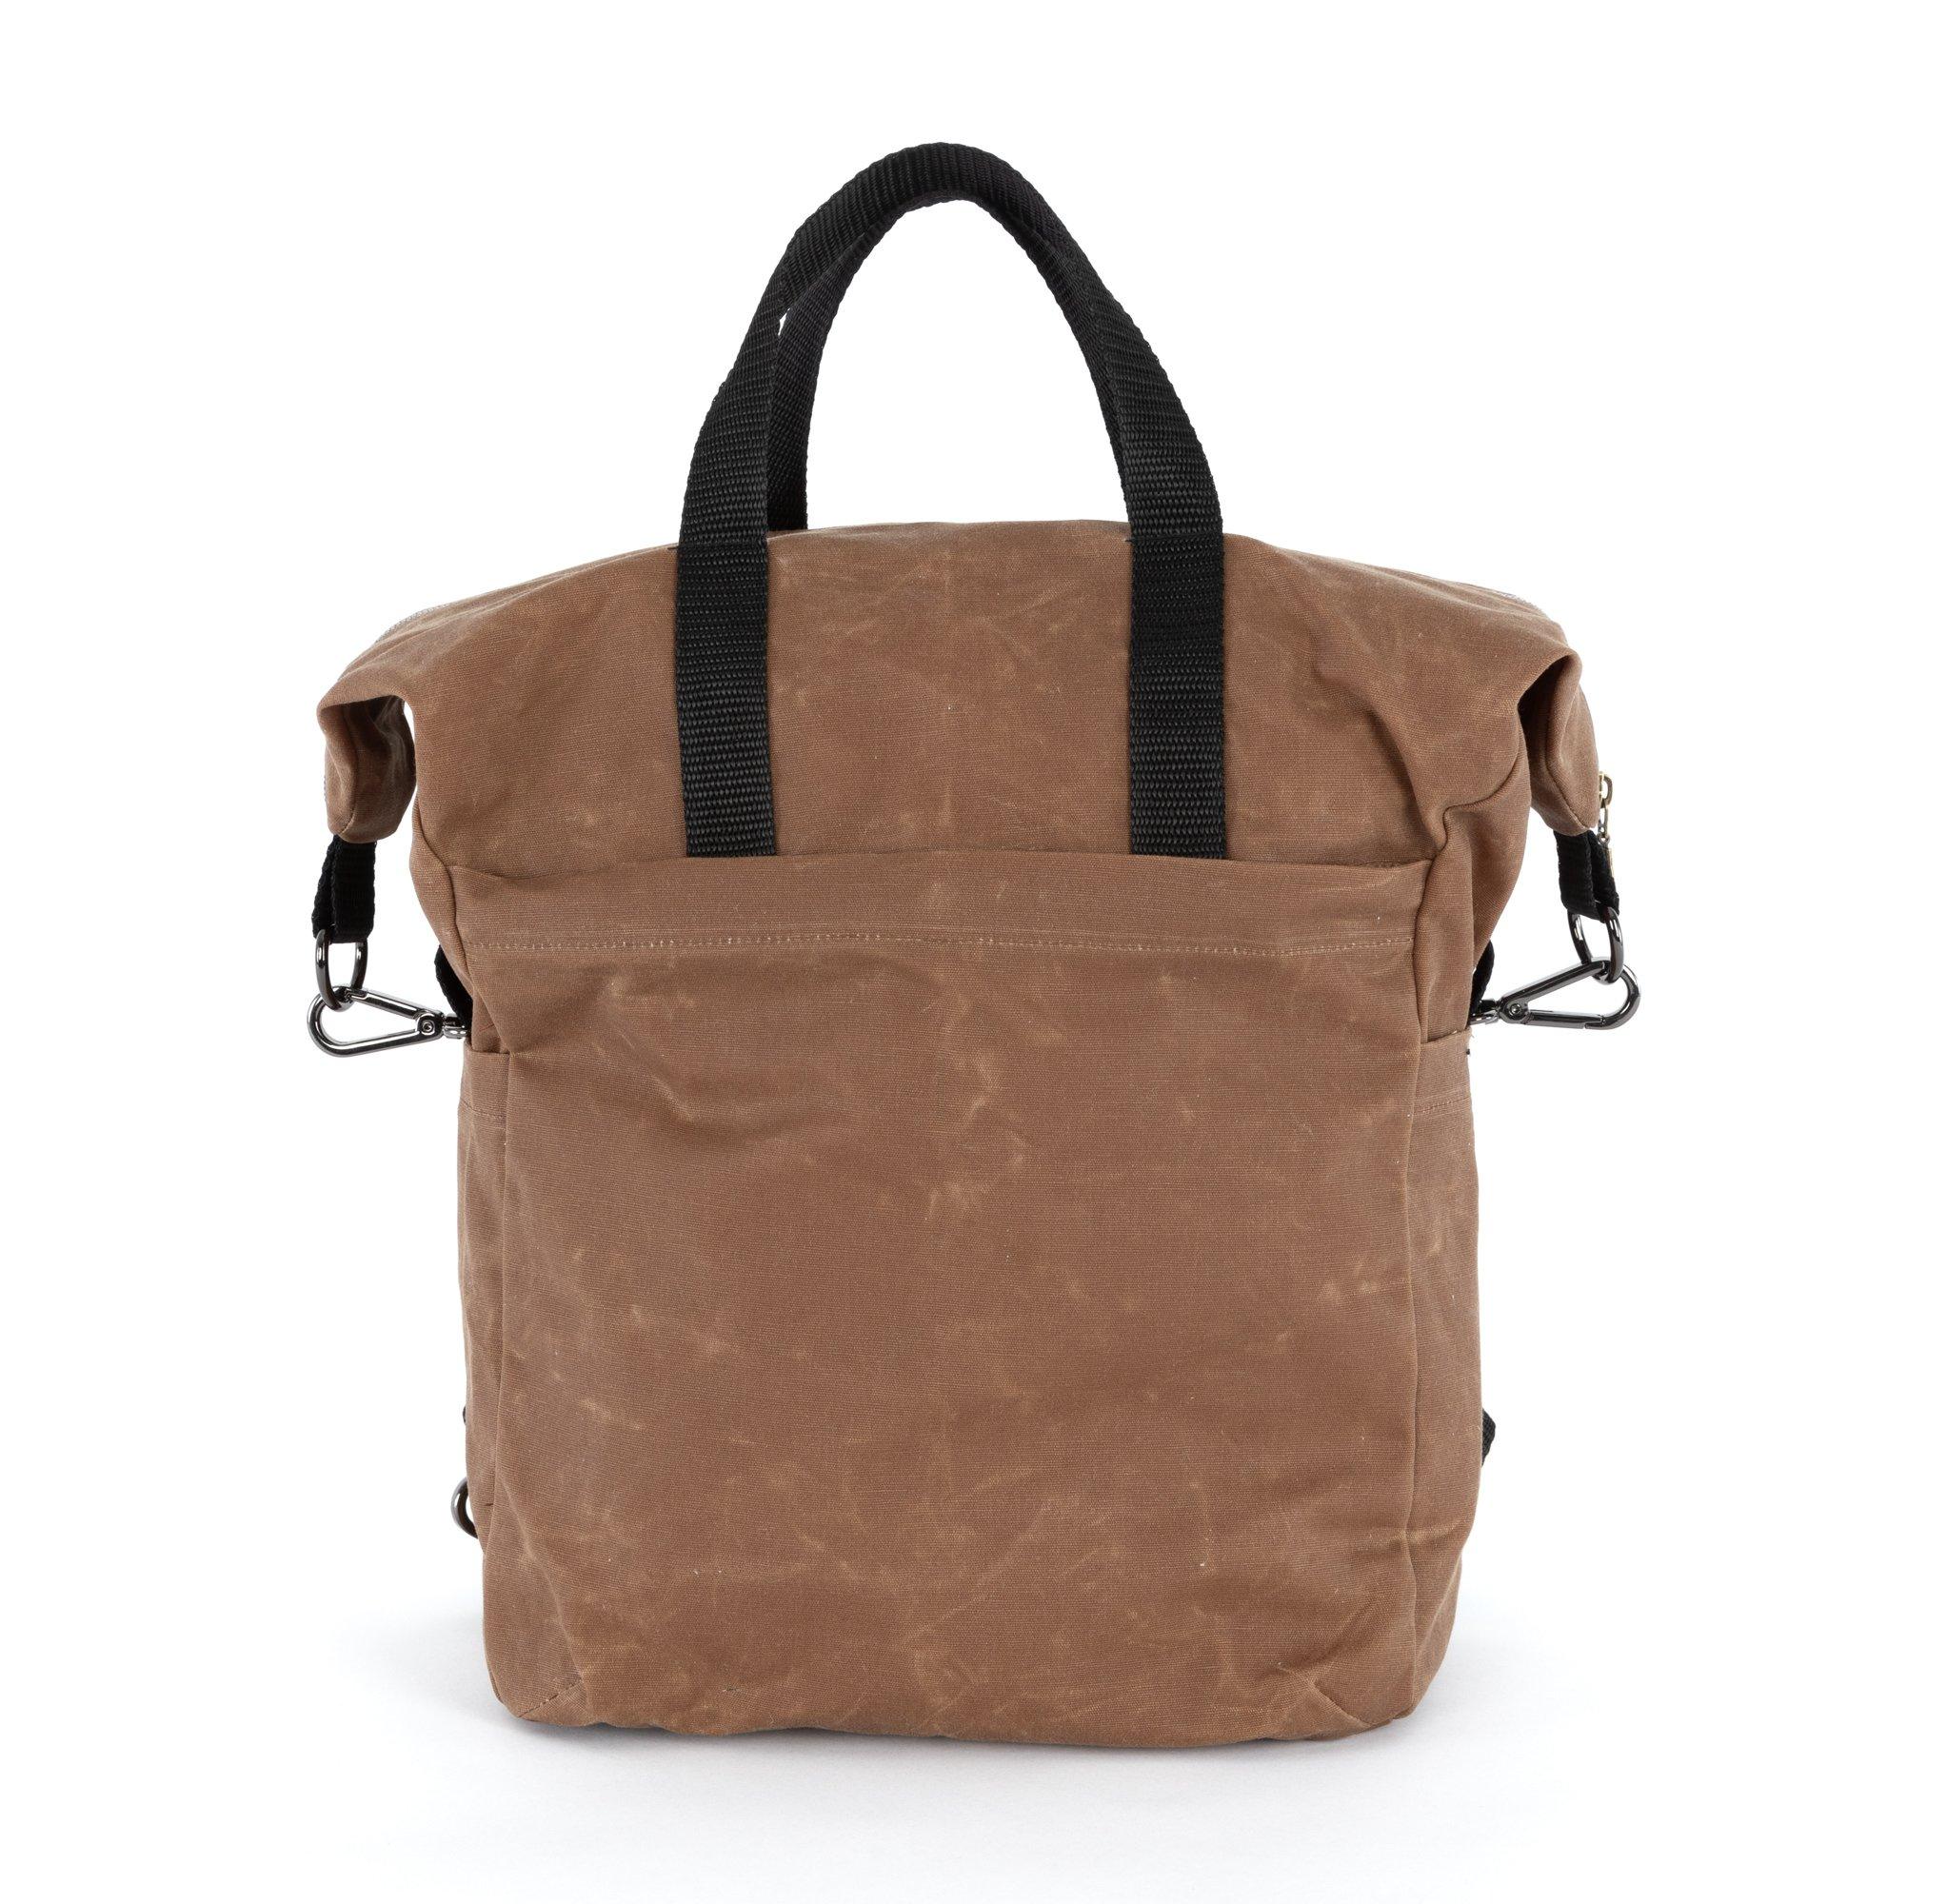 Minimalist brown waxed canvas bag made with the Galaxie 5 pattern